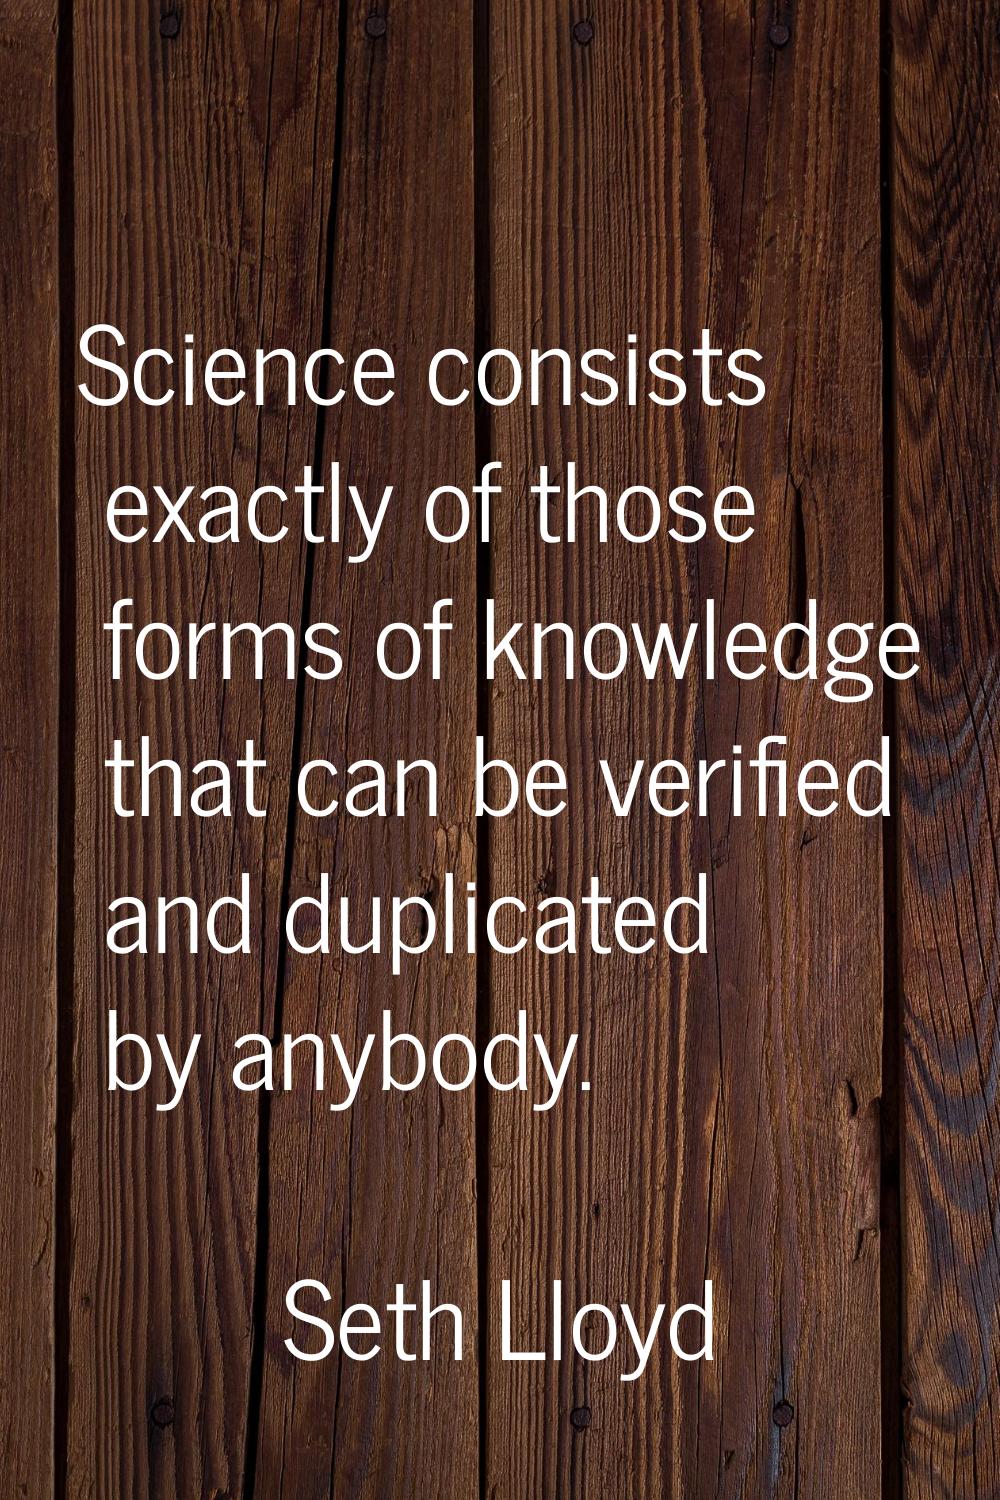 Science consists exactly of those forms of knowledge that can be verified and duplicated by anybody